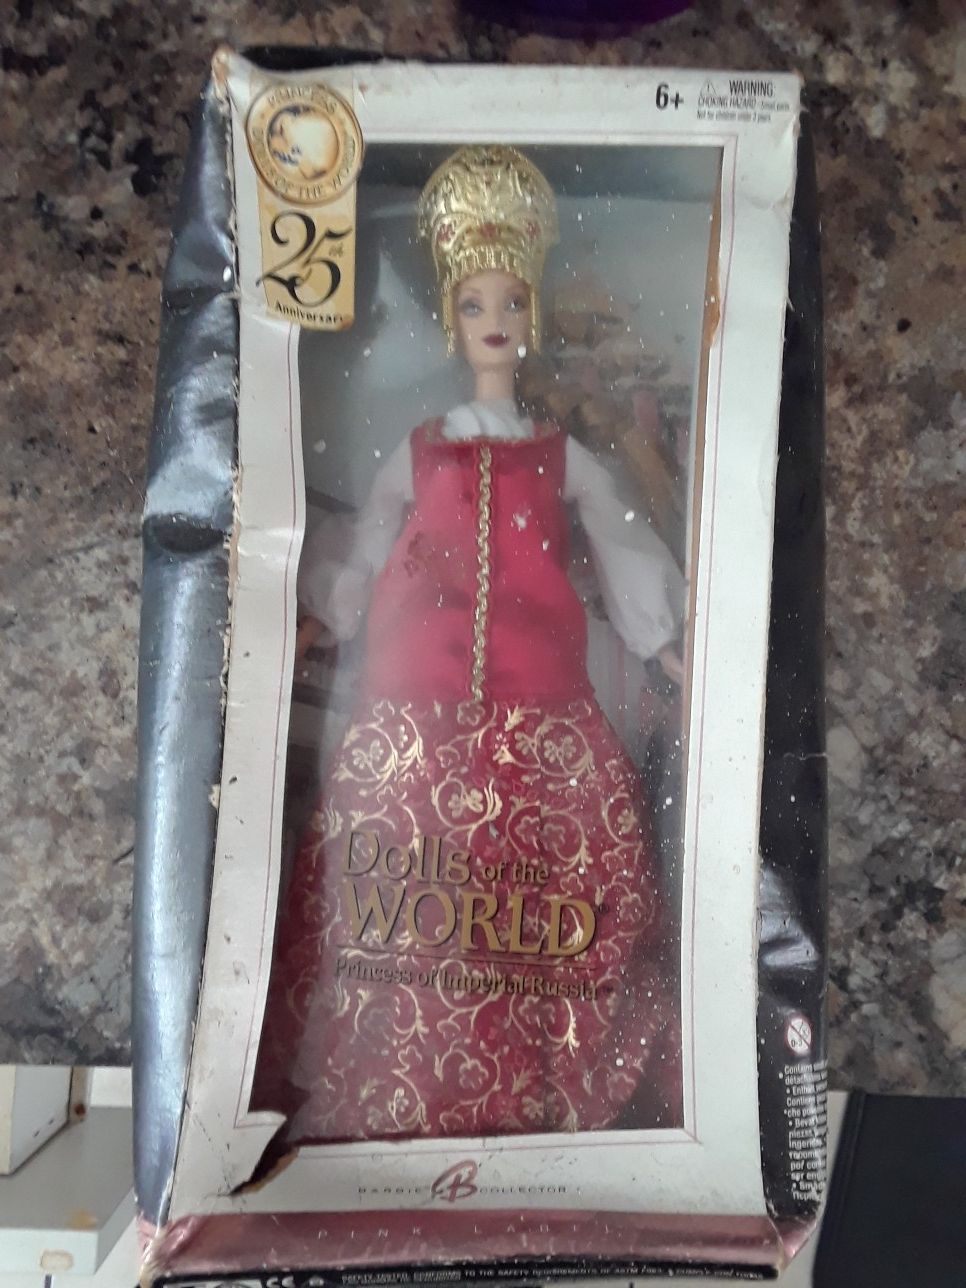 Barbie 25th edition World Doll.. this doll is the Princess Russia Edition